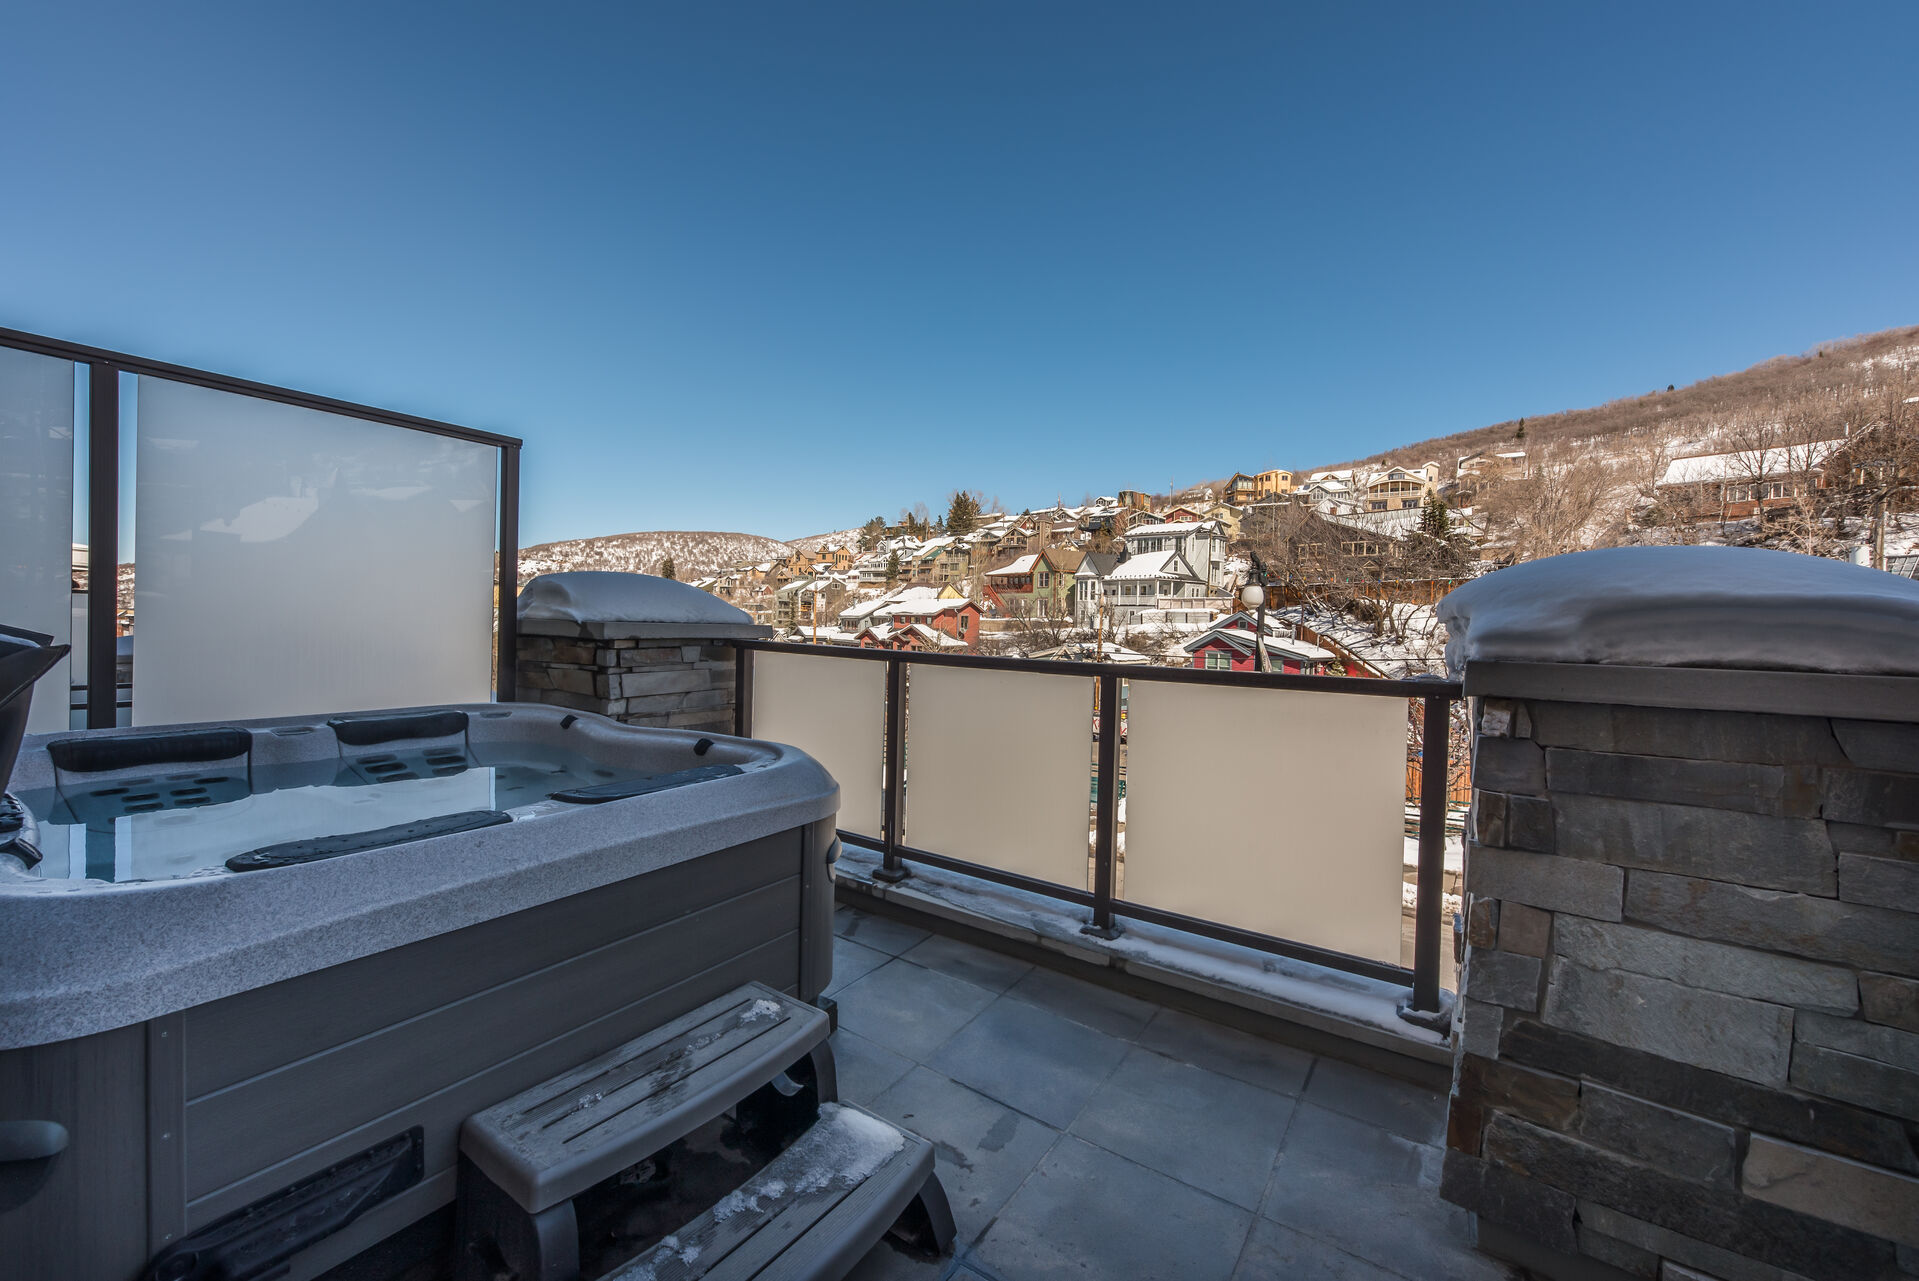 Separate Private Deck with Hot Tub and Great Views!